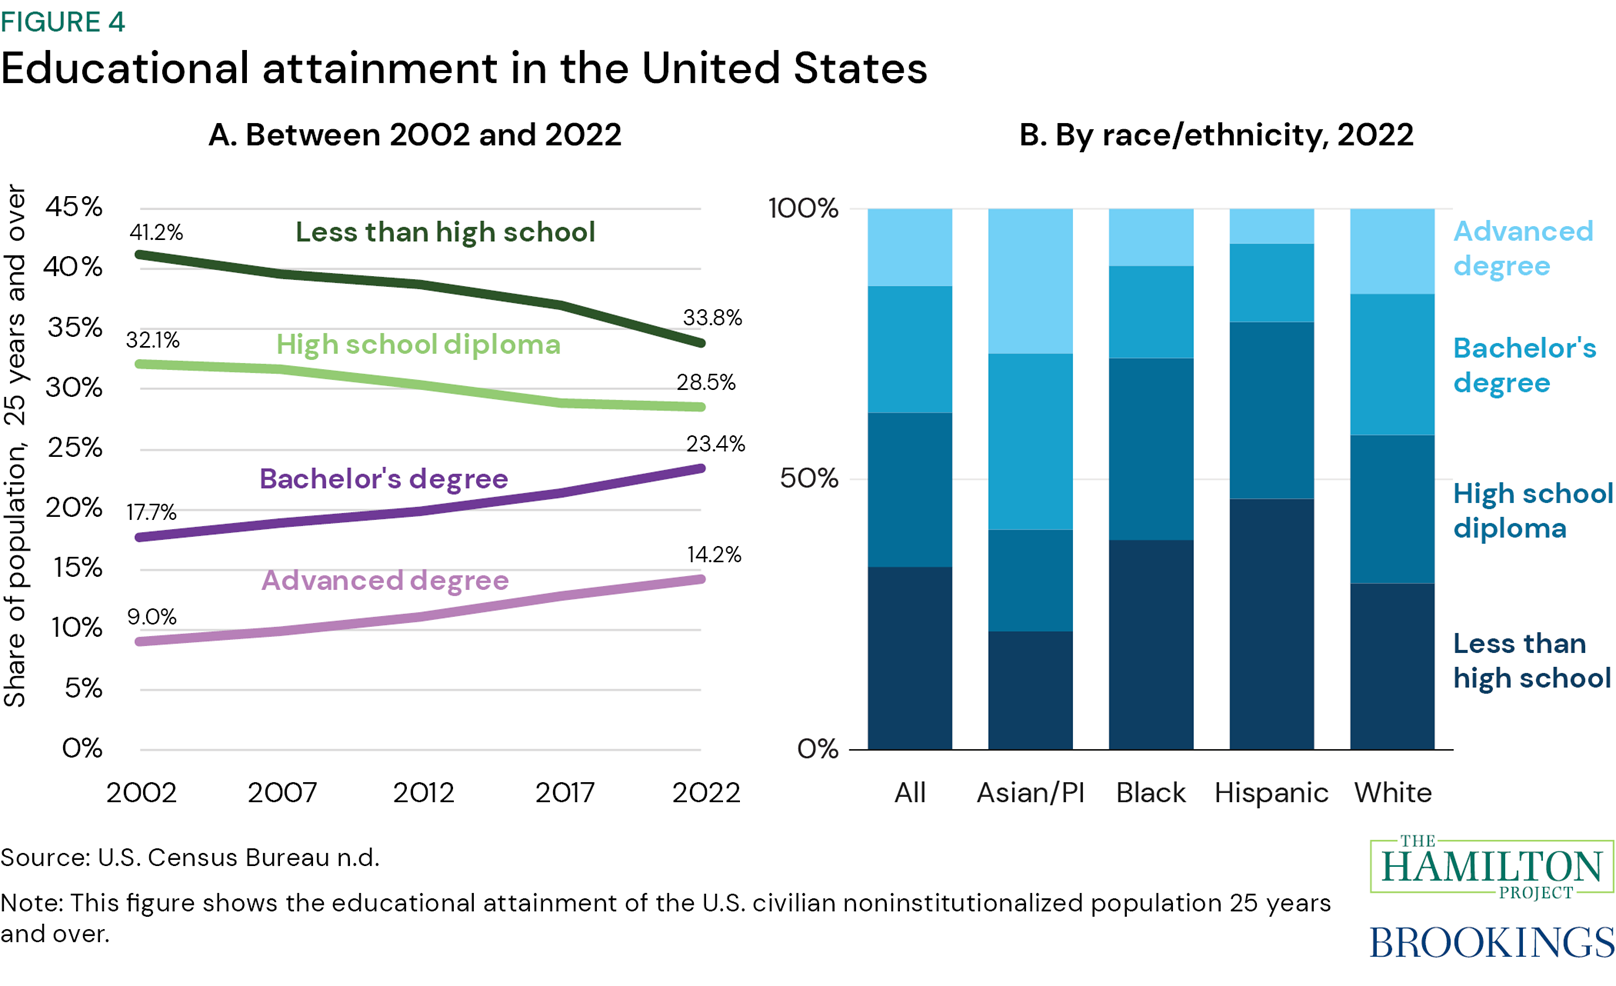 Figure 4: Educational attainment in the United States